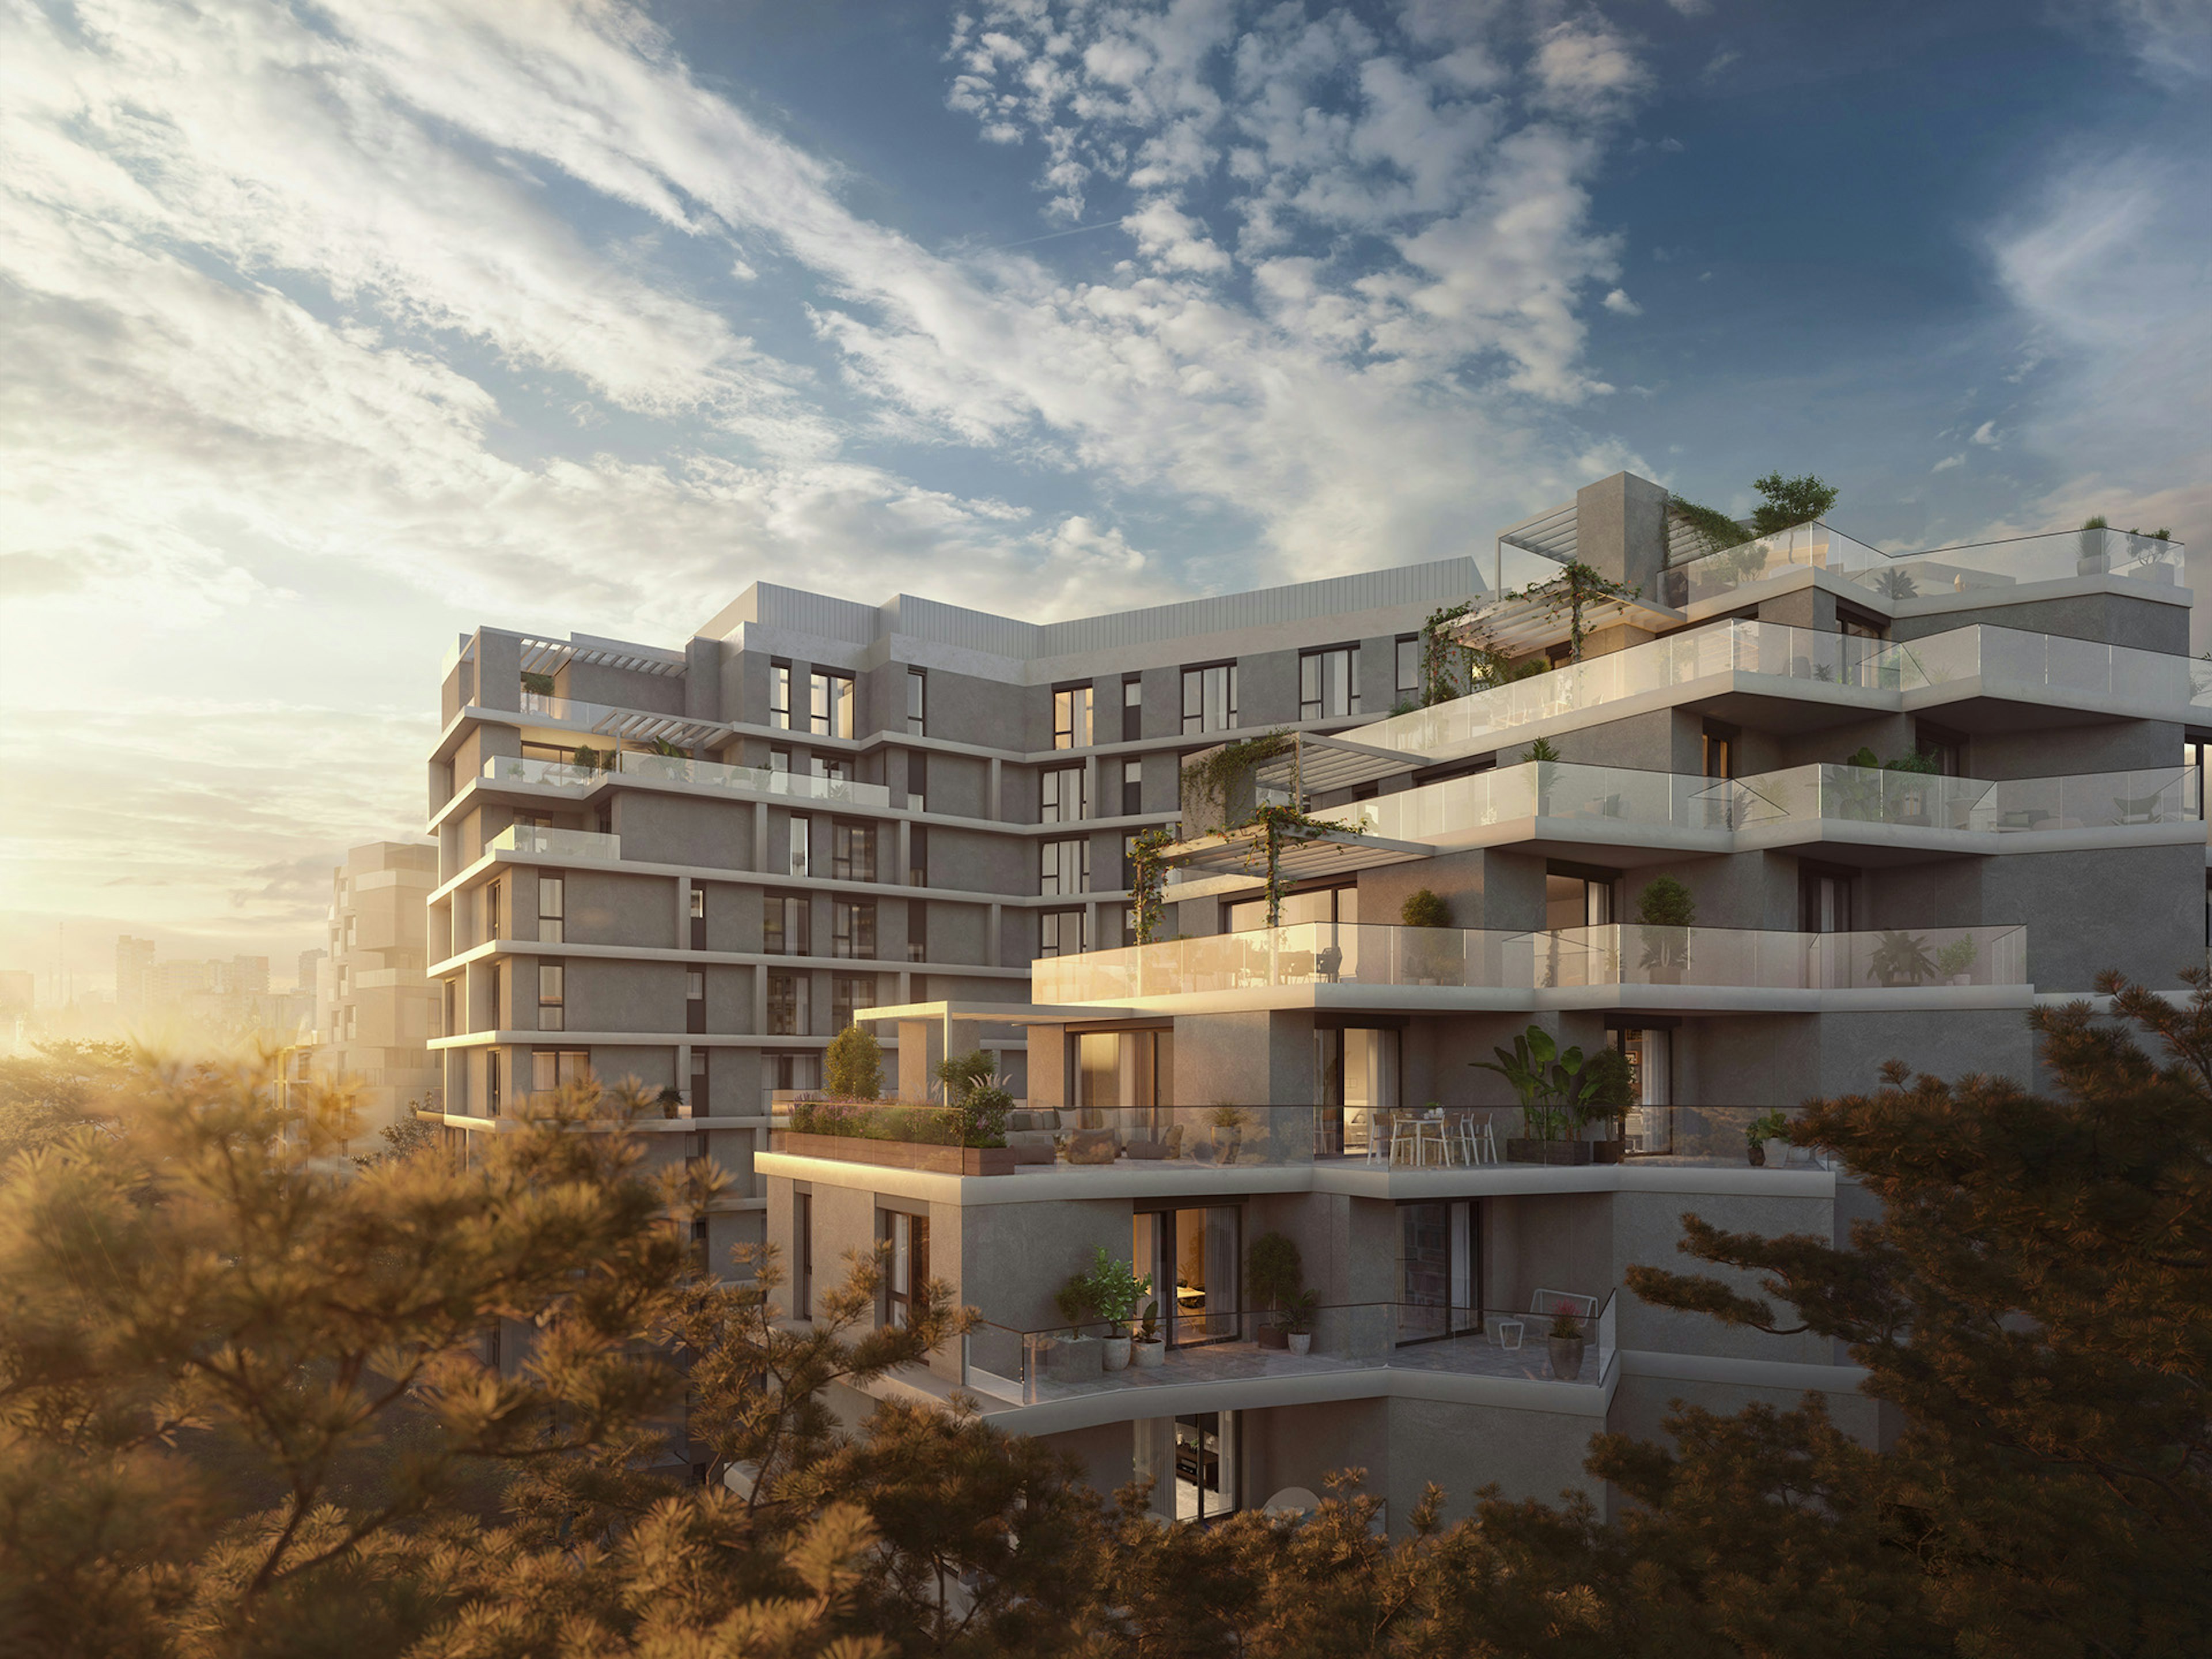 Visualization of the Gamma Residence project